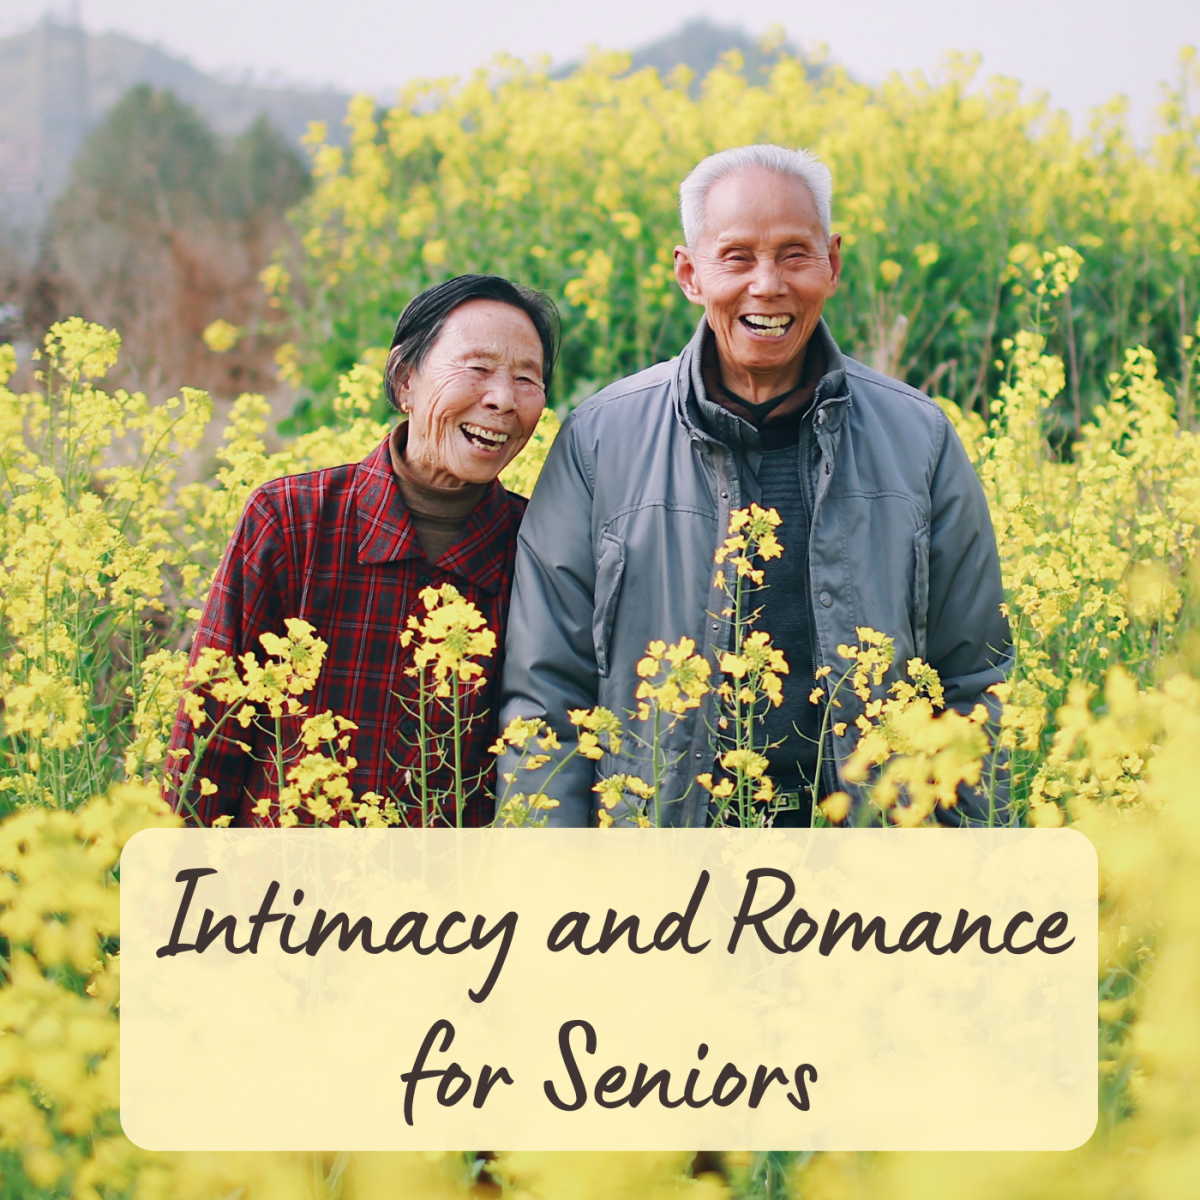 Explore some romance tips for older adults!